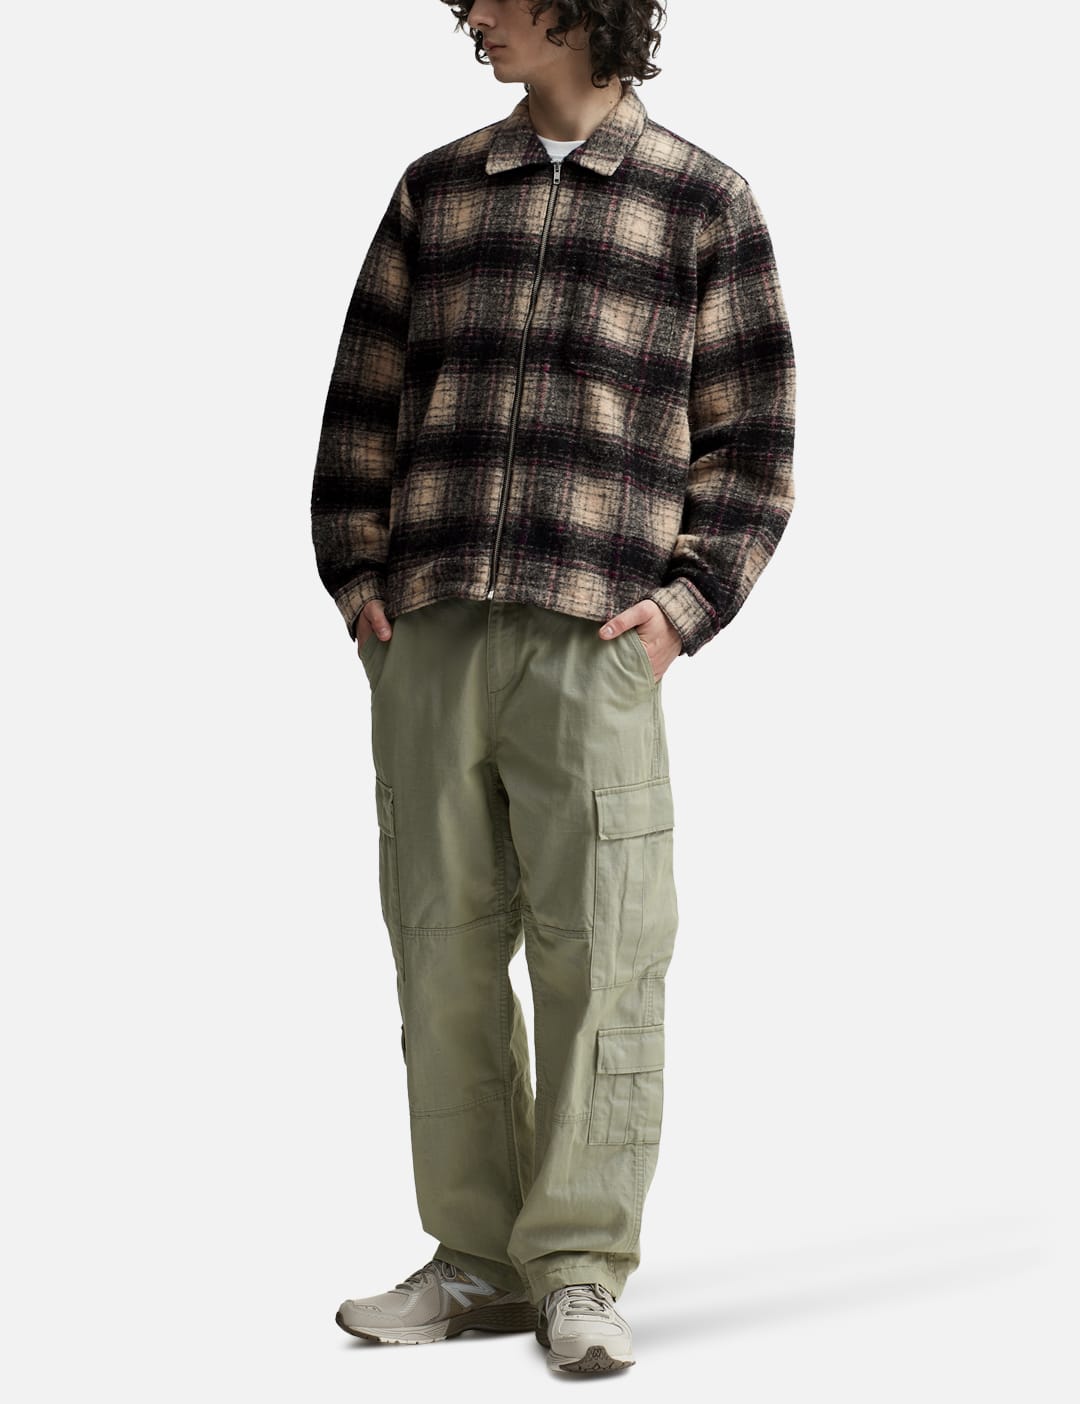 Stüssy - Wool Plaid Zip Shirt | HBX - Globally Curated Fashion and